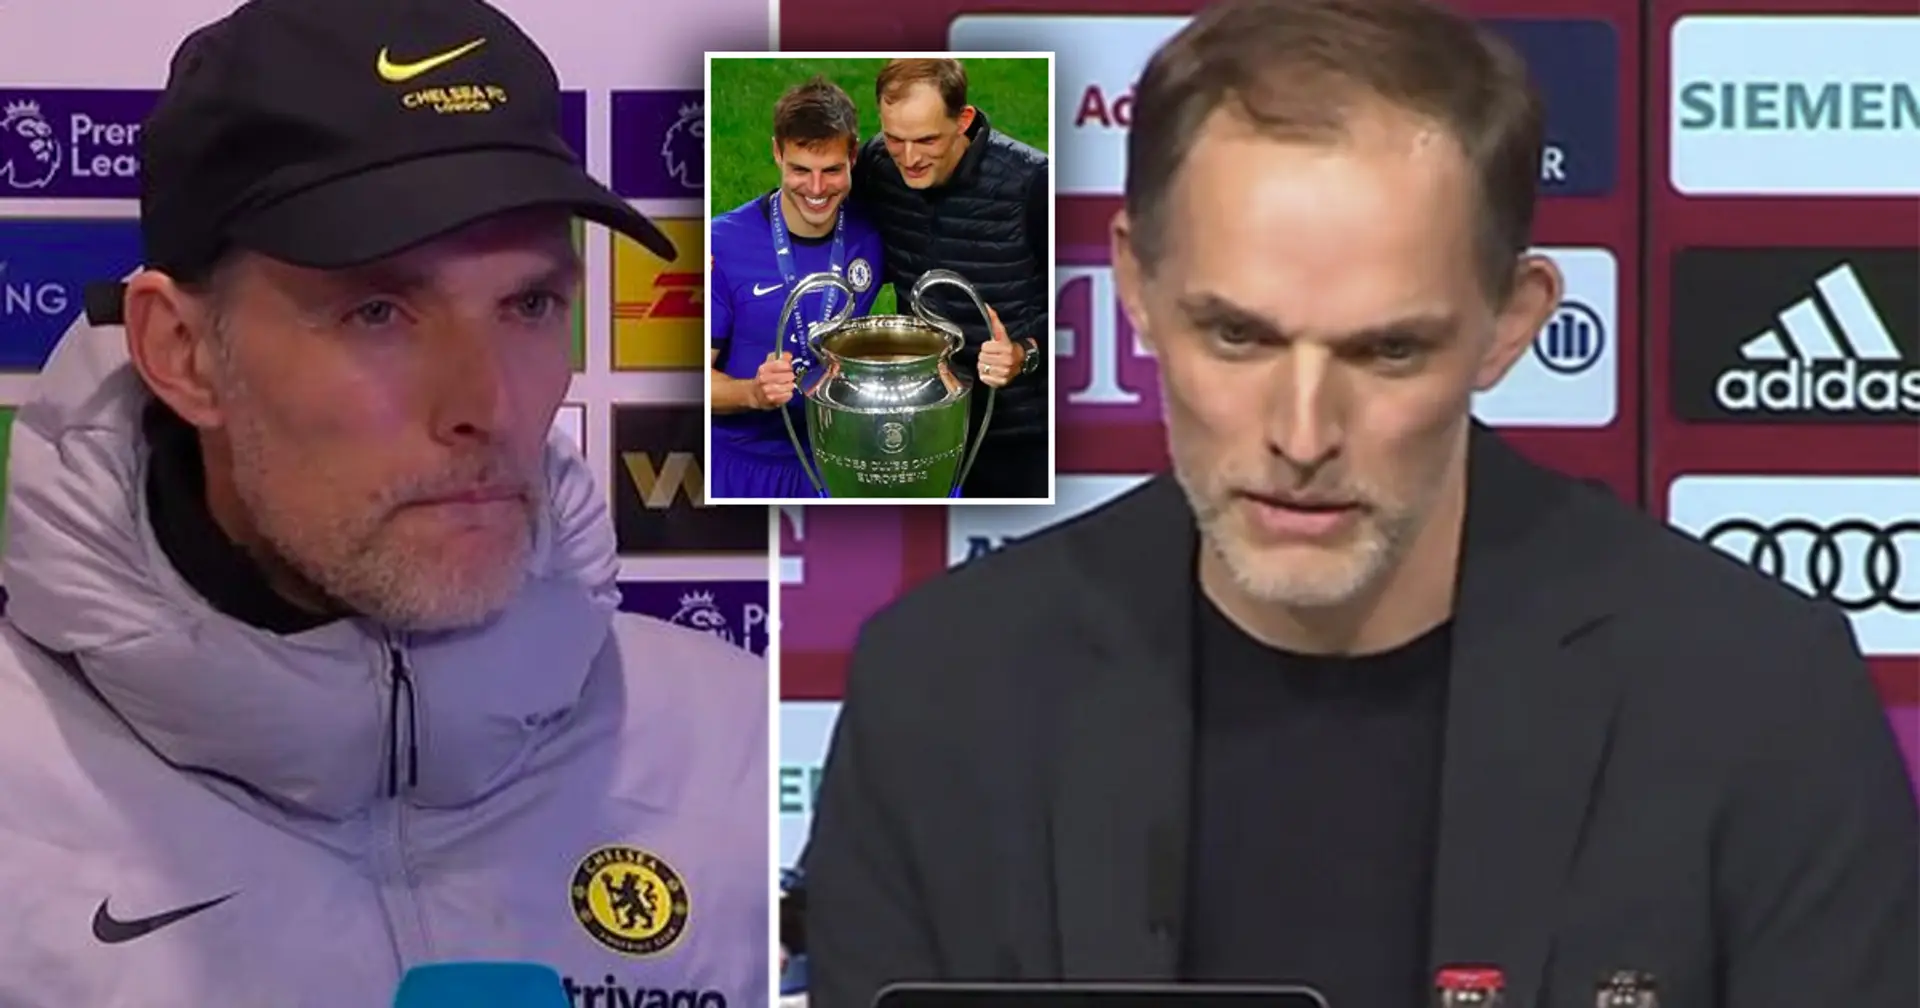 How much Tuchel will earn at Bayern compared to his time at Chelsea